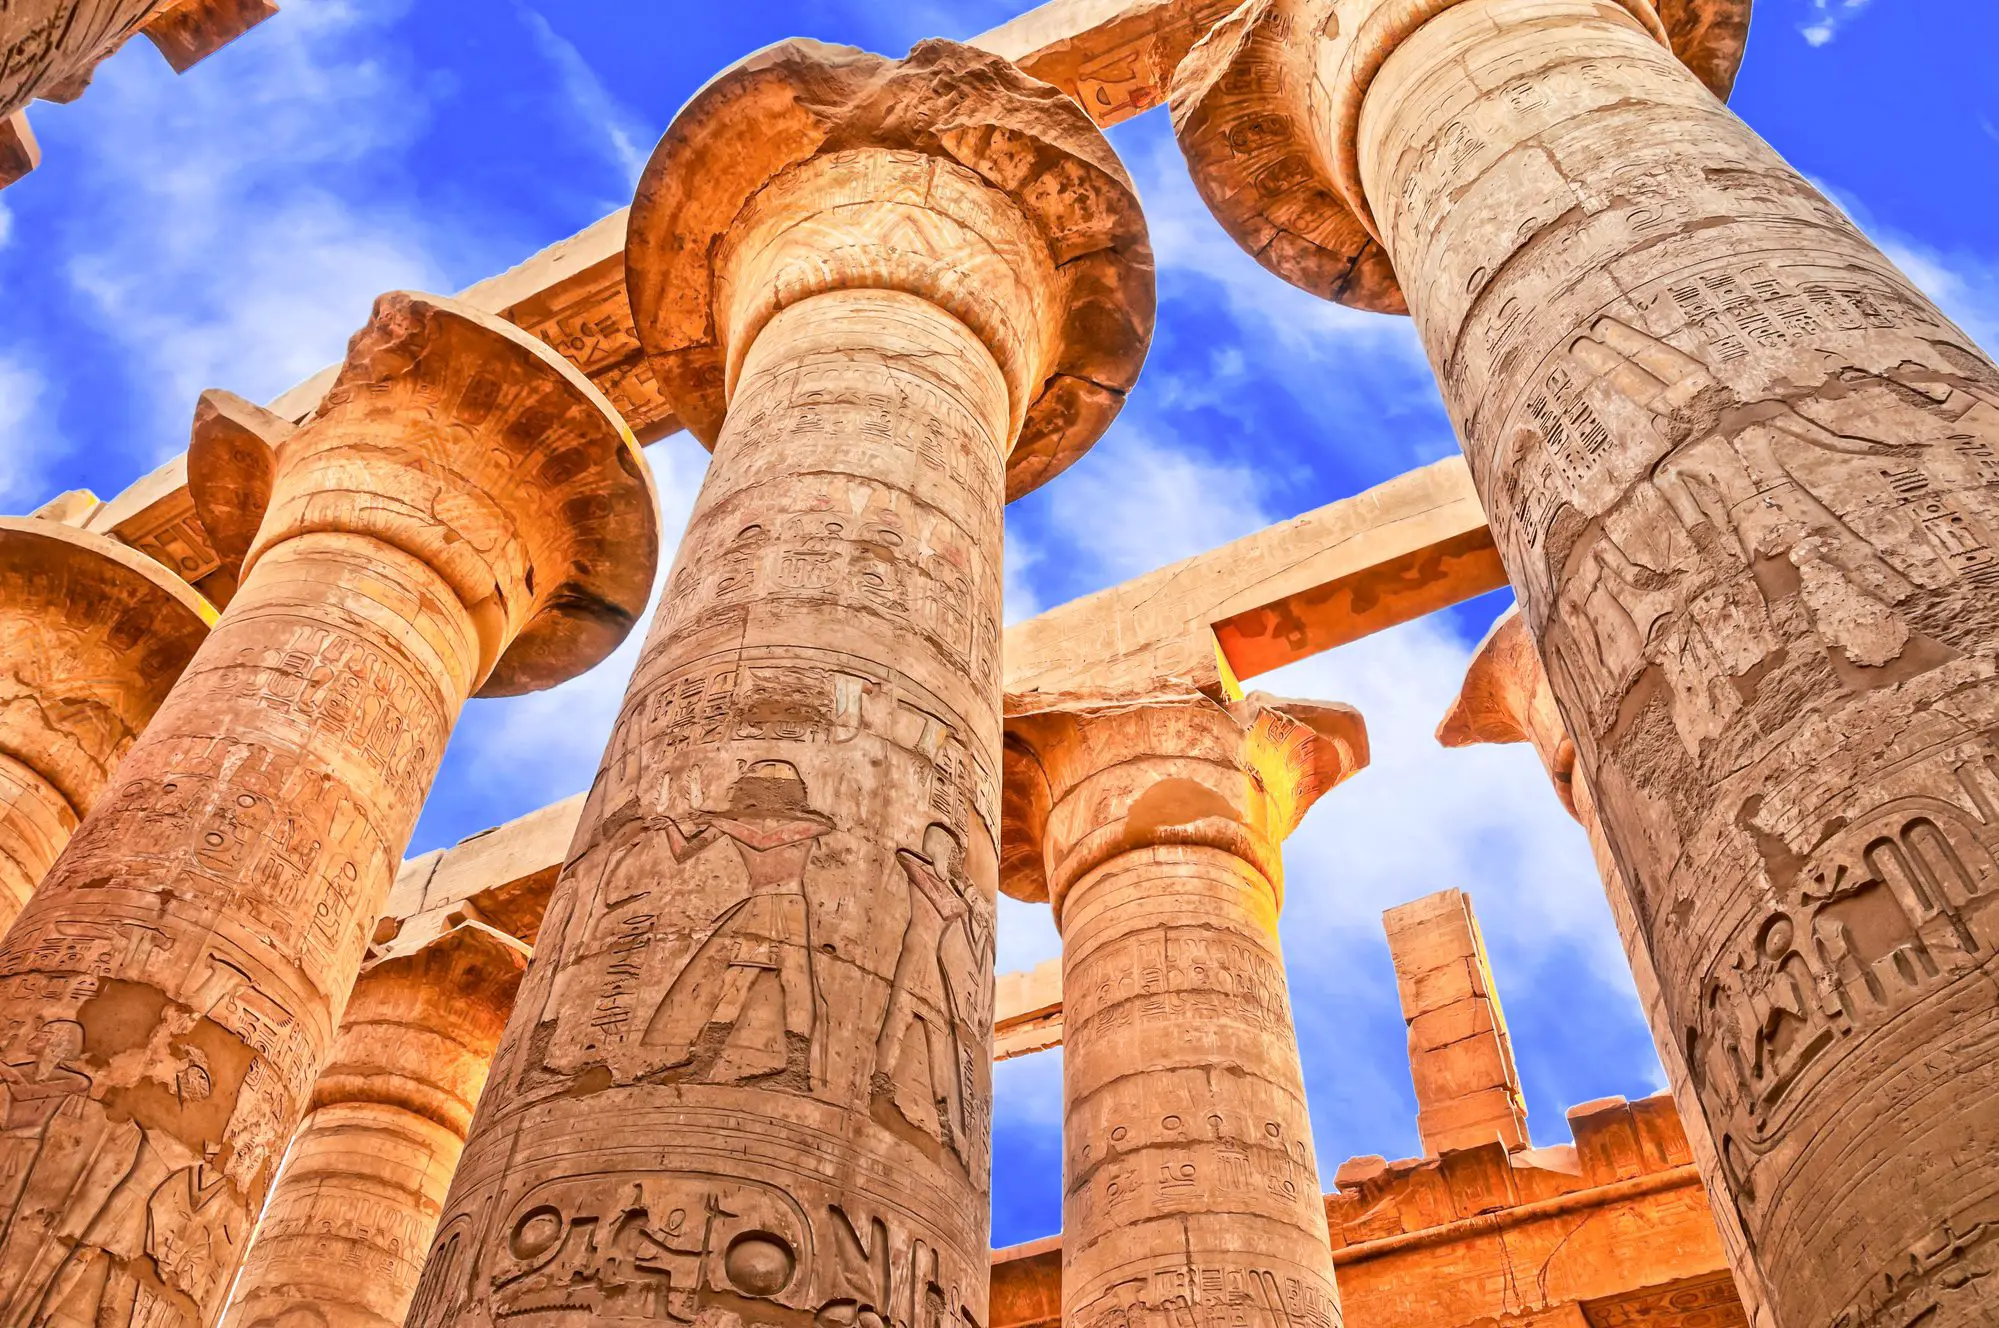 Great Hypostyle Hall and clouds at the Temples of Karnak (ancient Thebes. Luxor, Egypt